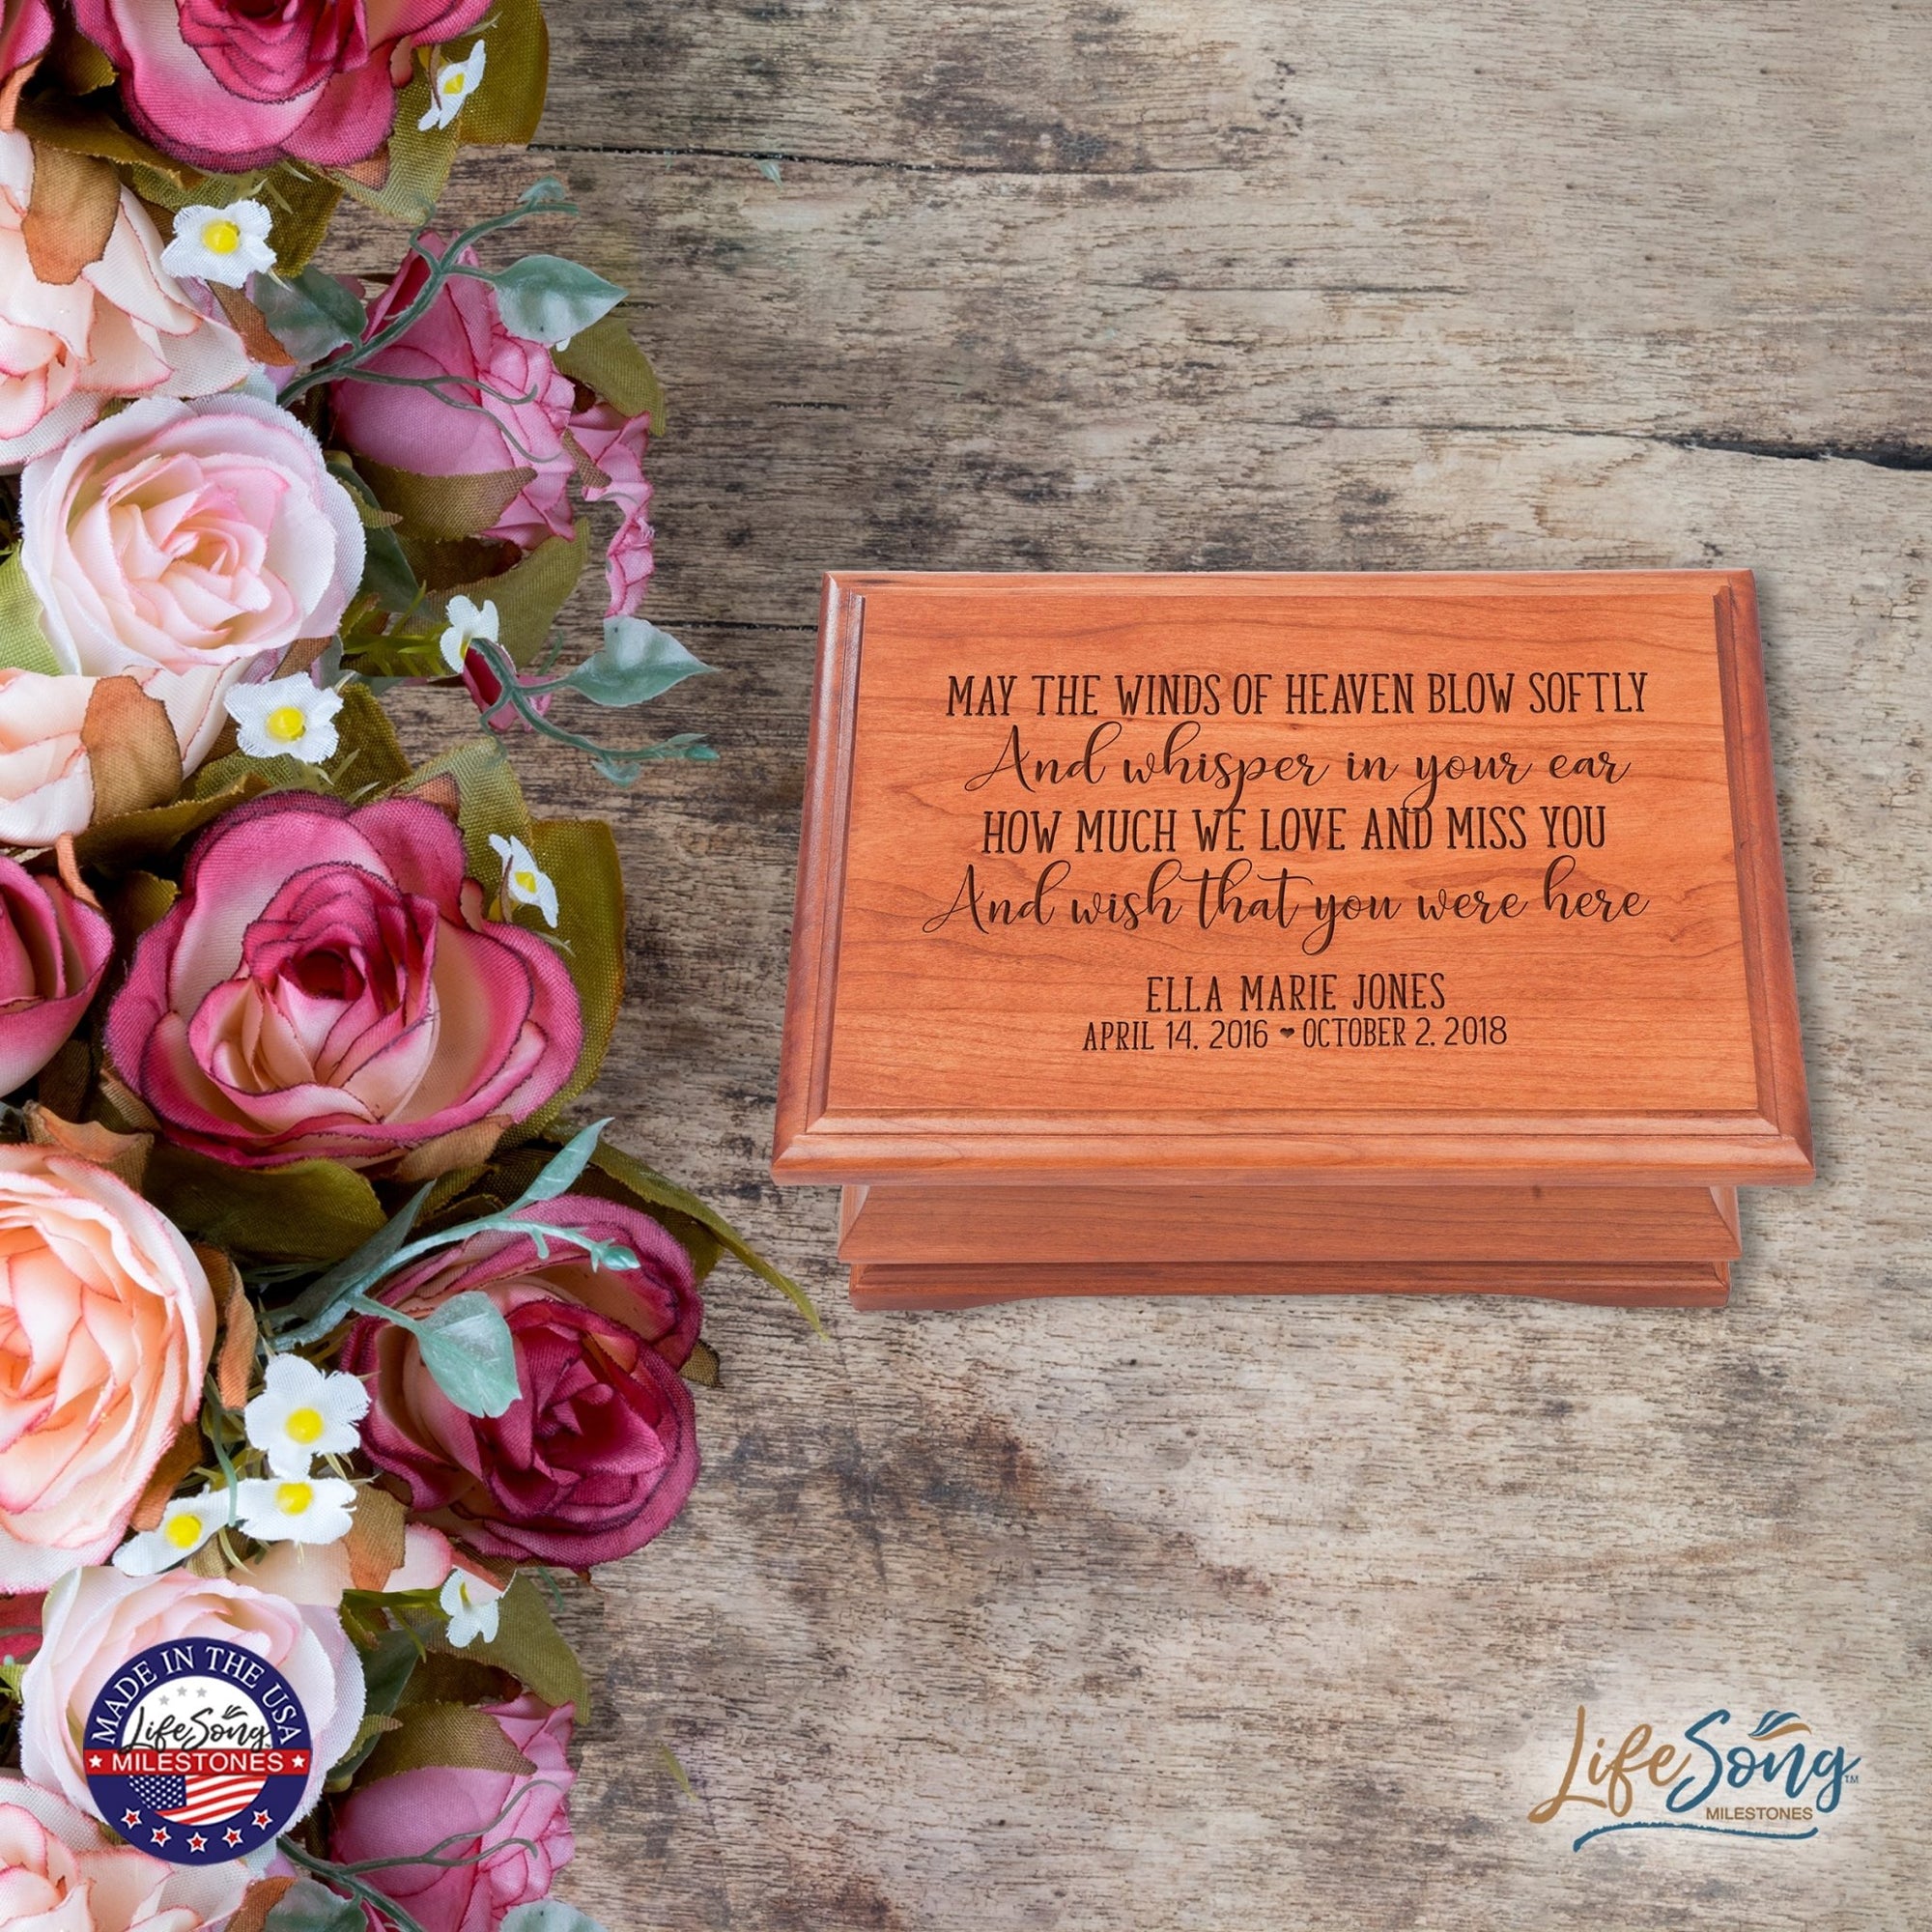 Personalized Wooden Memorial Jewelry Box Organizer 11.5x8.25 – May The Winds Of Heaven - LifeSong Milestones